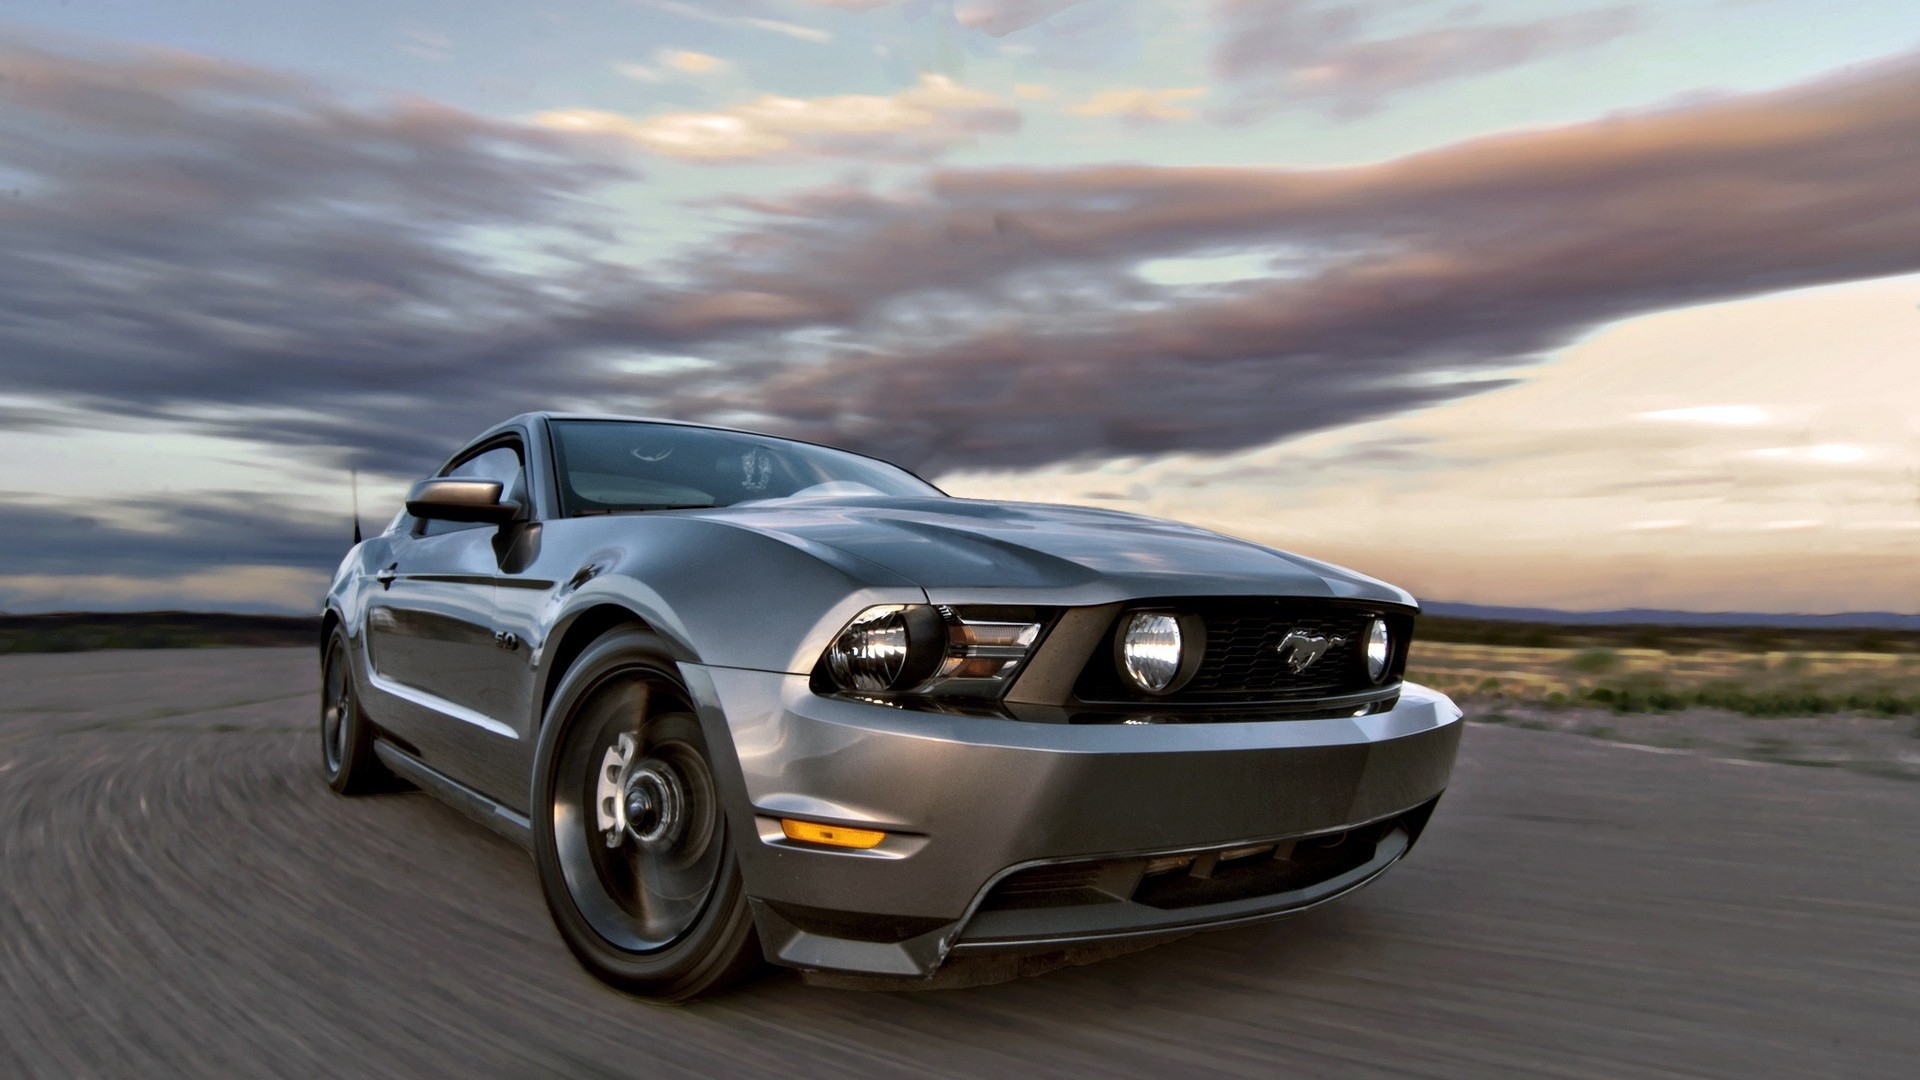 Gray Ford Mustang GT for 1920 x 1080 HDTV 1080p resolution